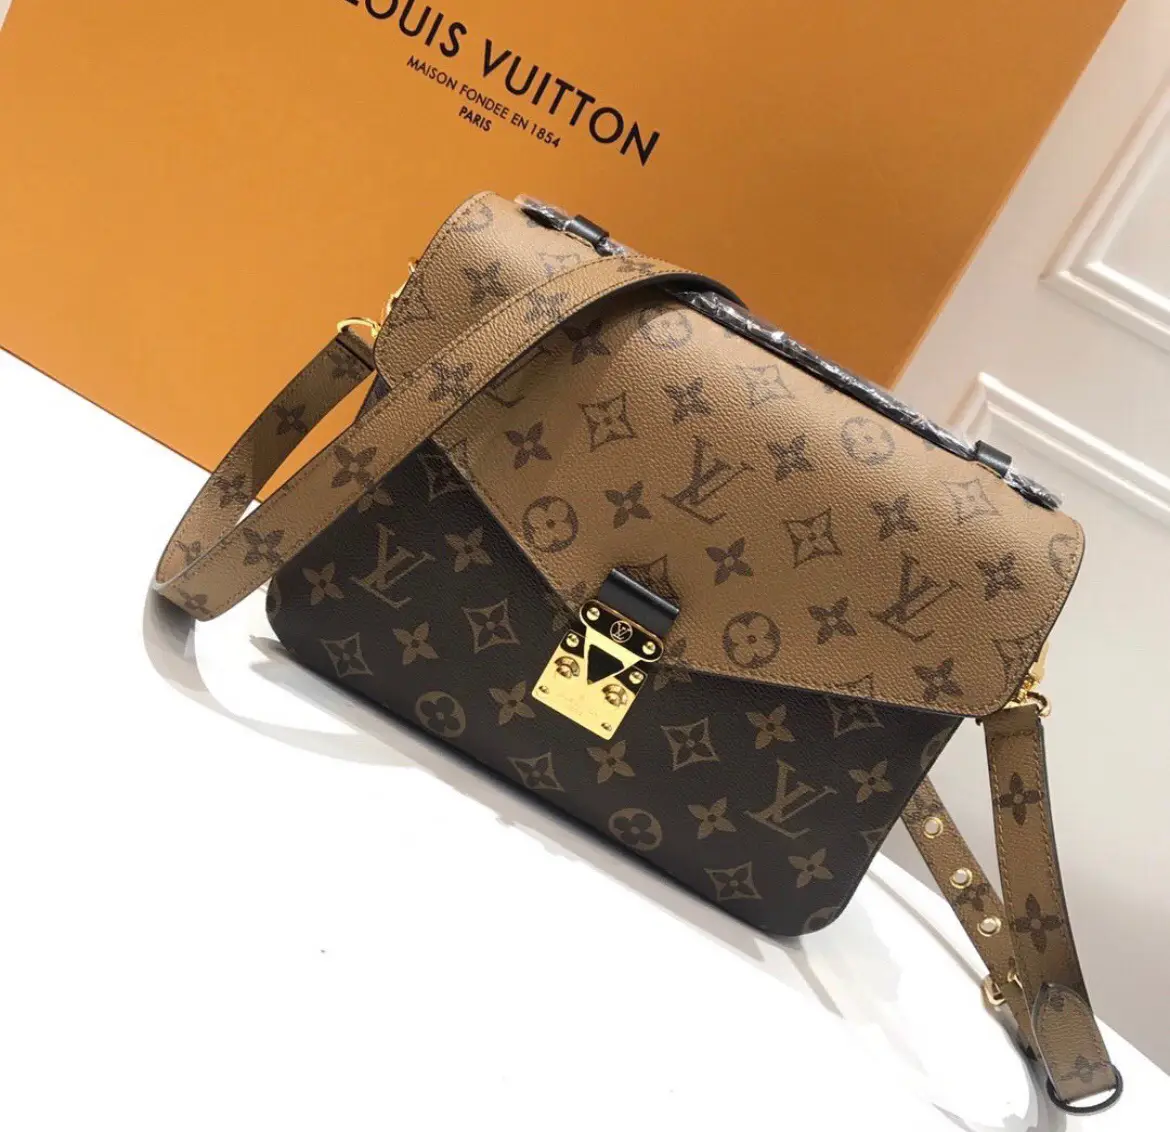 REVIEWING A FAKE LOUIS VUITTON CROSSBODY DAMIER BAG FROM DHGATE #dhgate  #dhfence #dhg8 